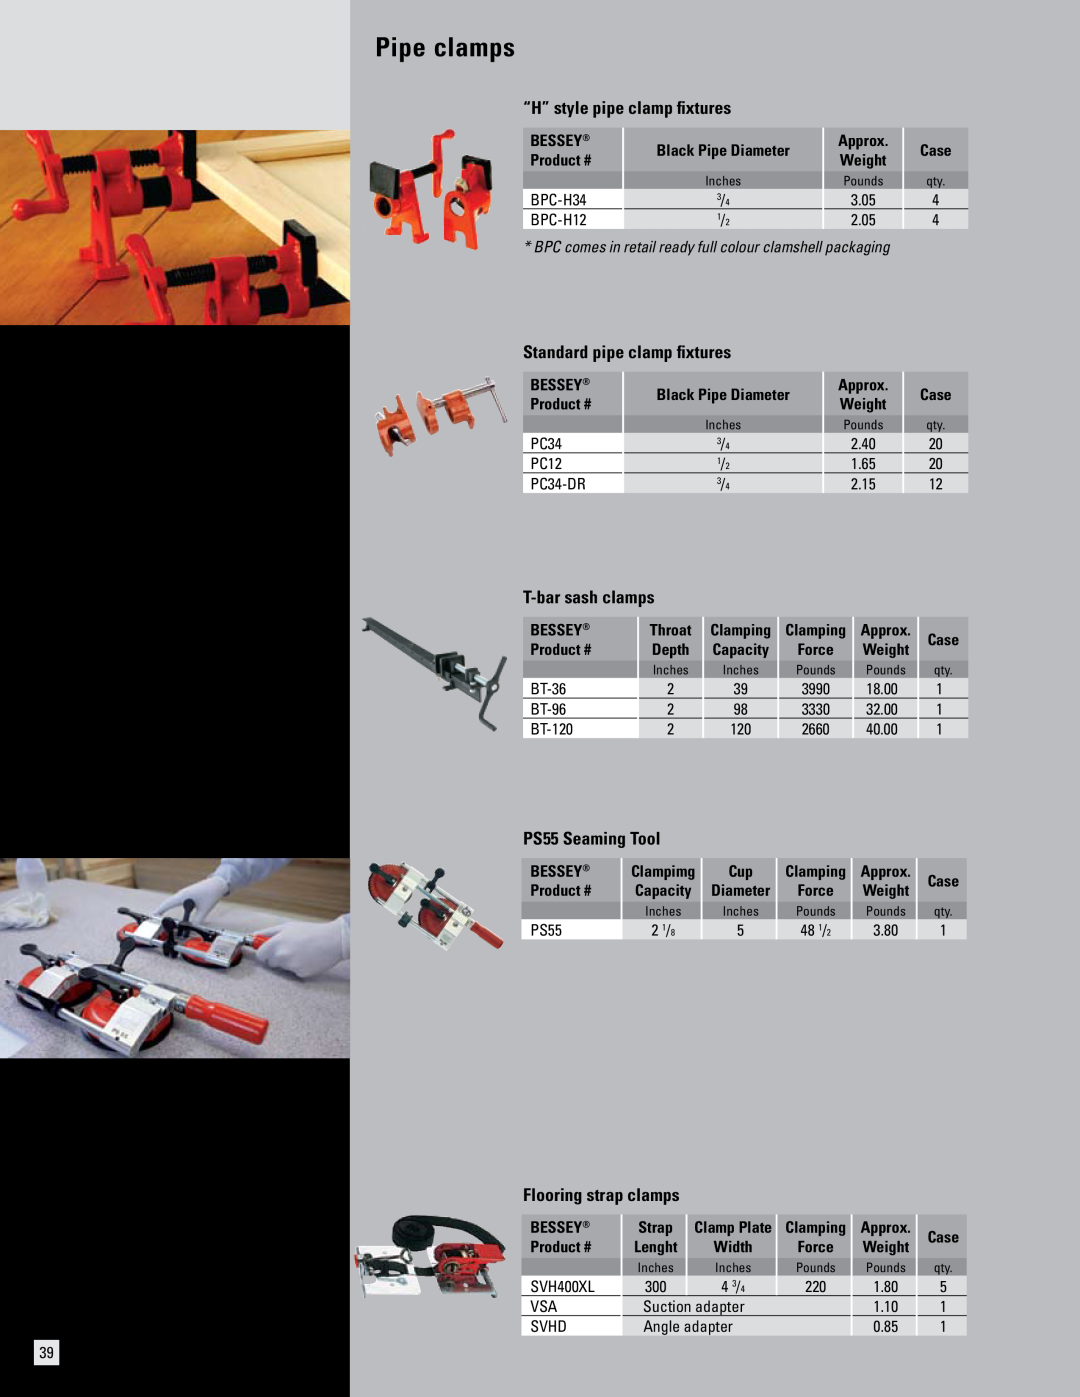 Bessey Pipe clamps, “H” style pipe clamp fixtures, Standard pipe clamp fixtures, T-bar sash clamps, PS55 Seaming Tool 